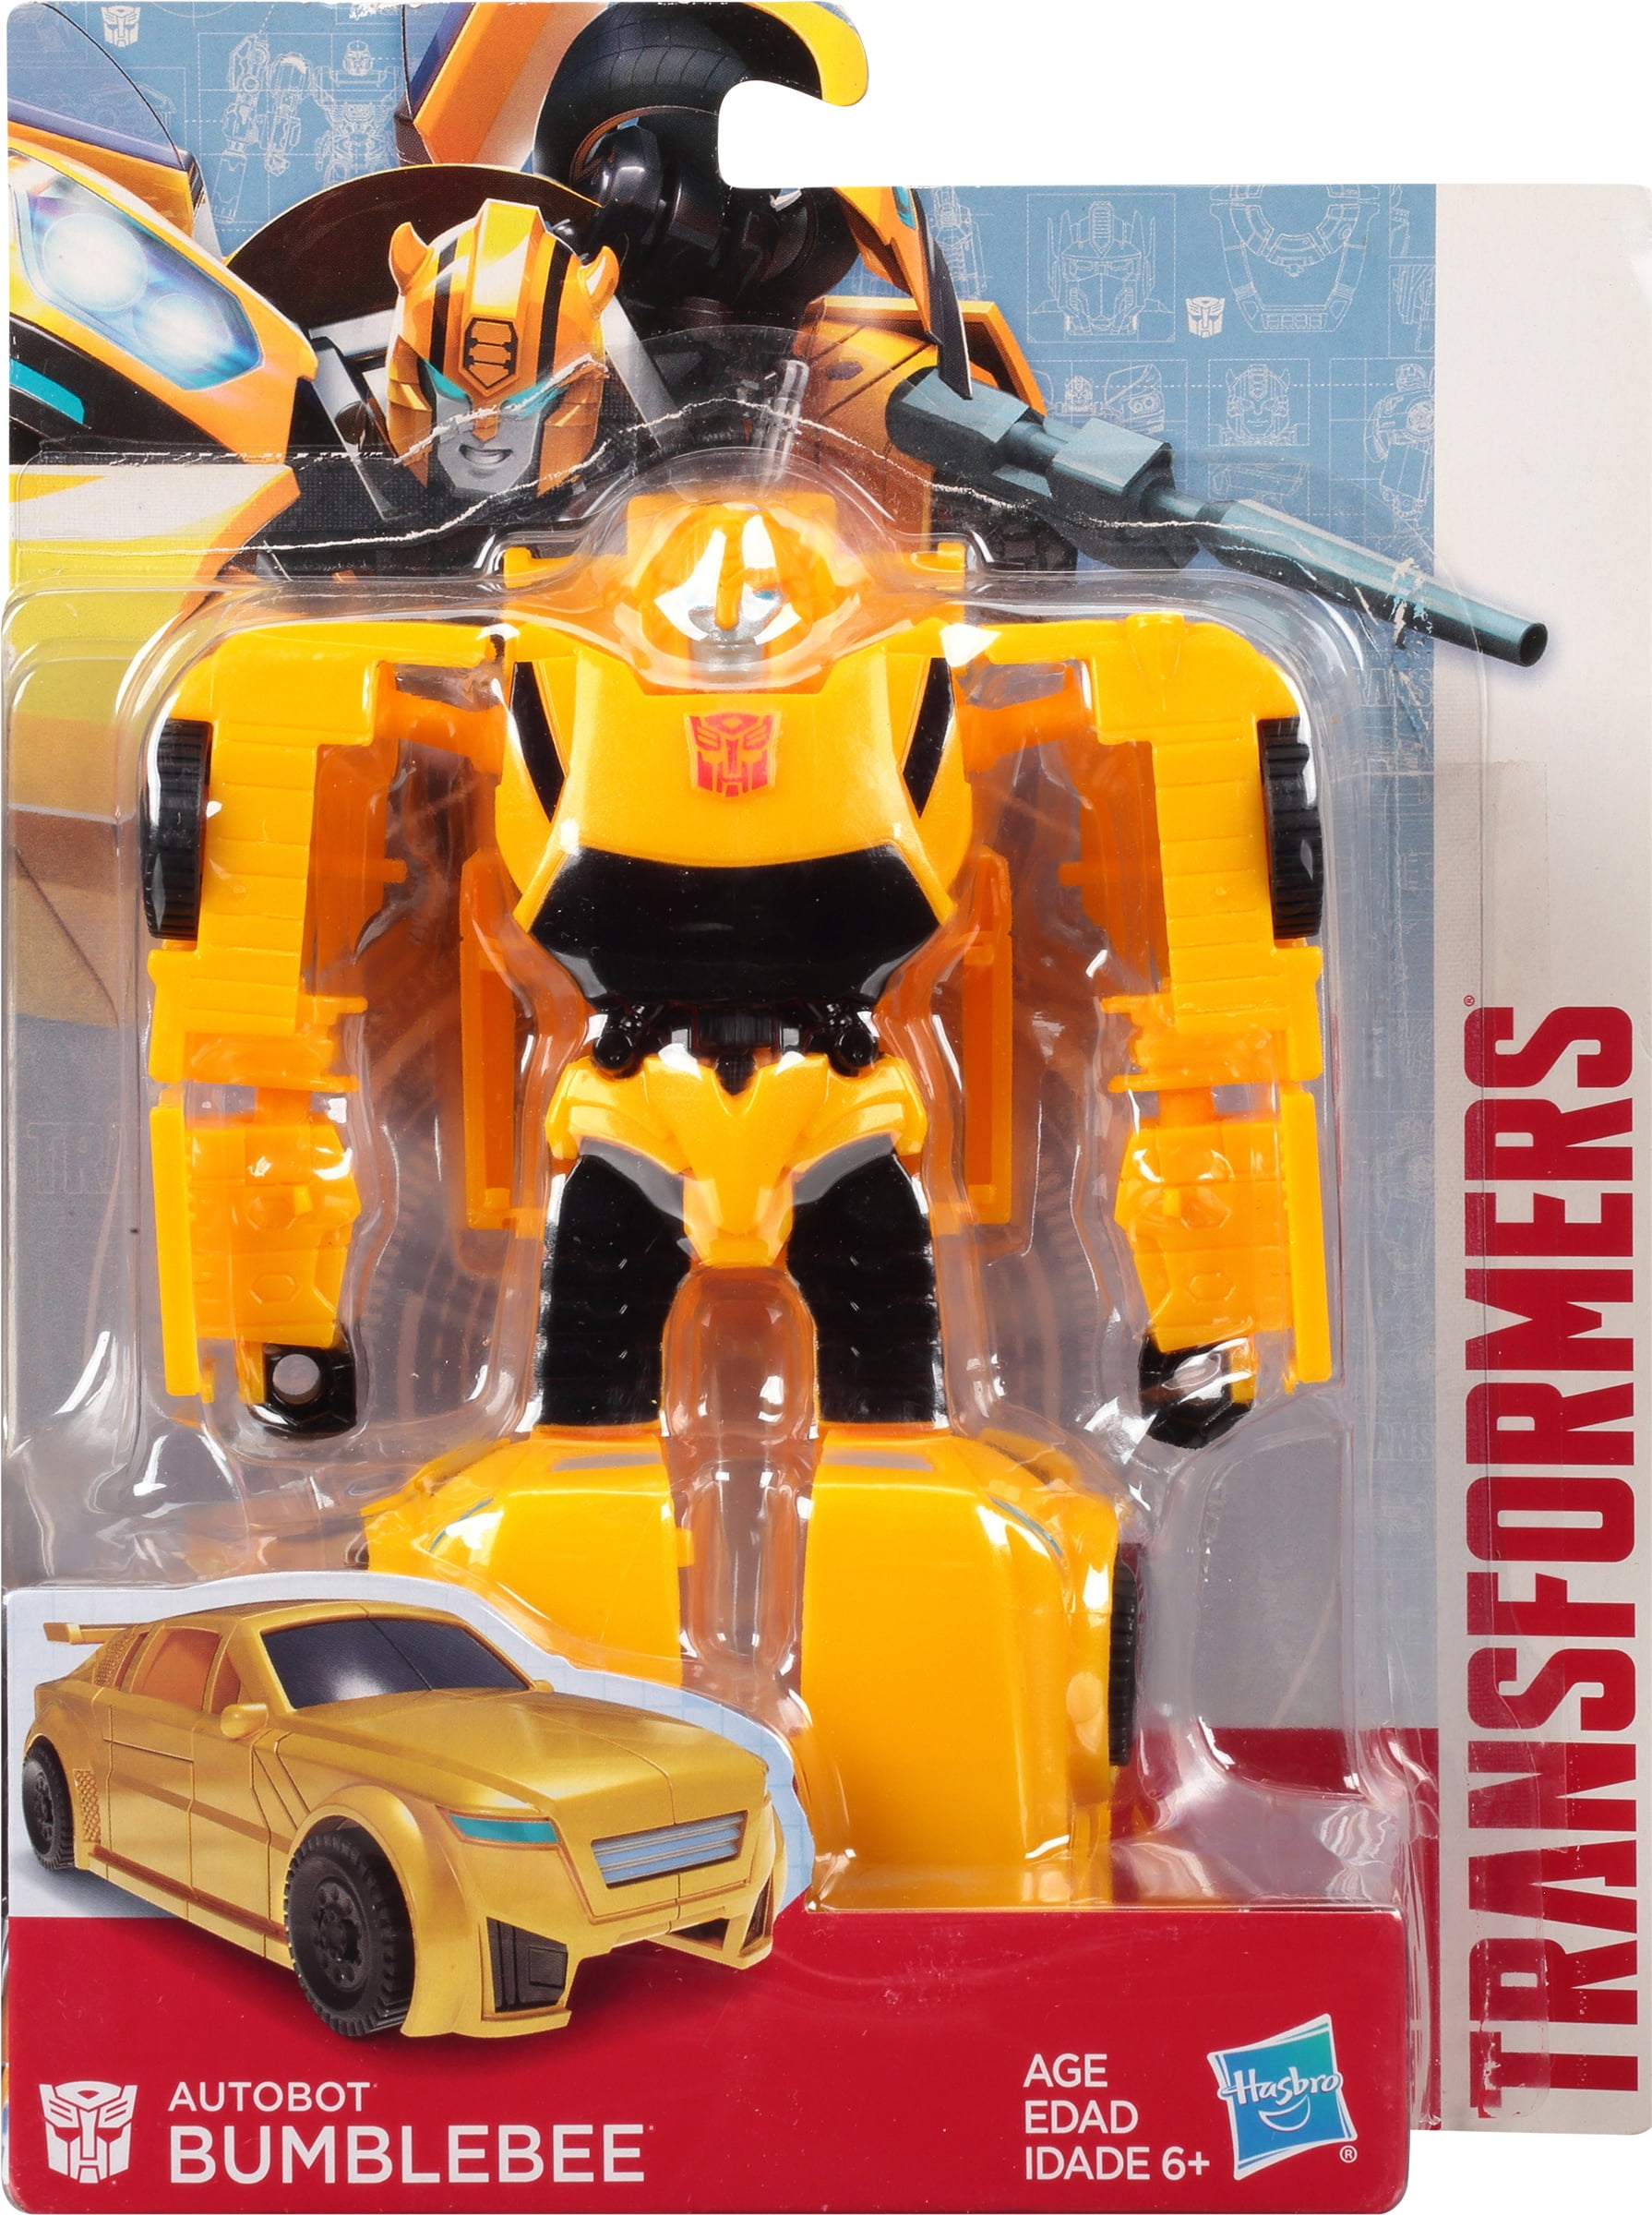 Transformers Authentics Bumblebee 4" Figure Brand New and Free Shipping! 